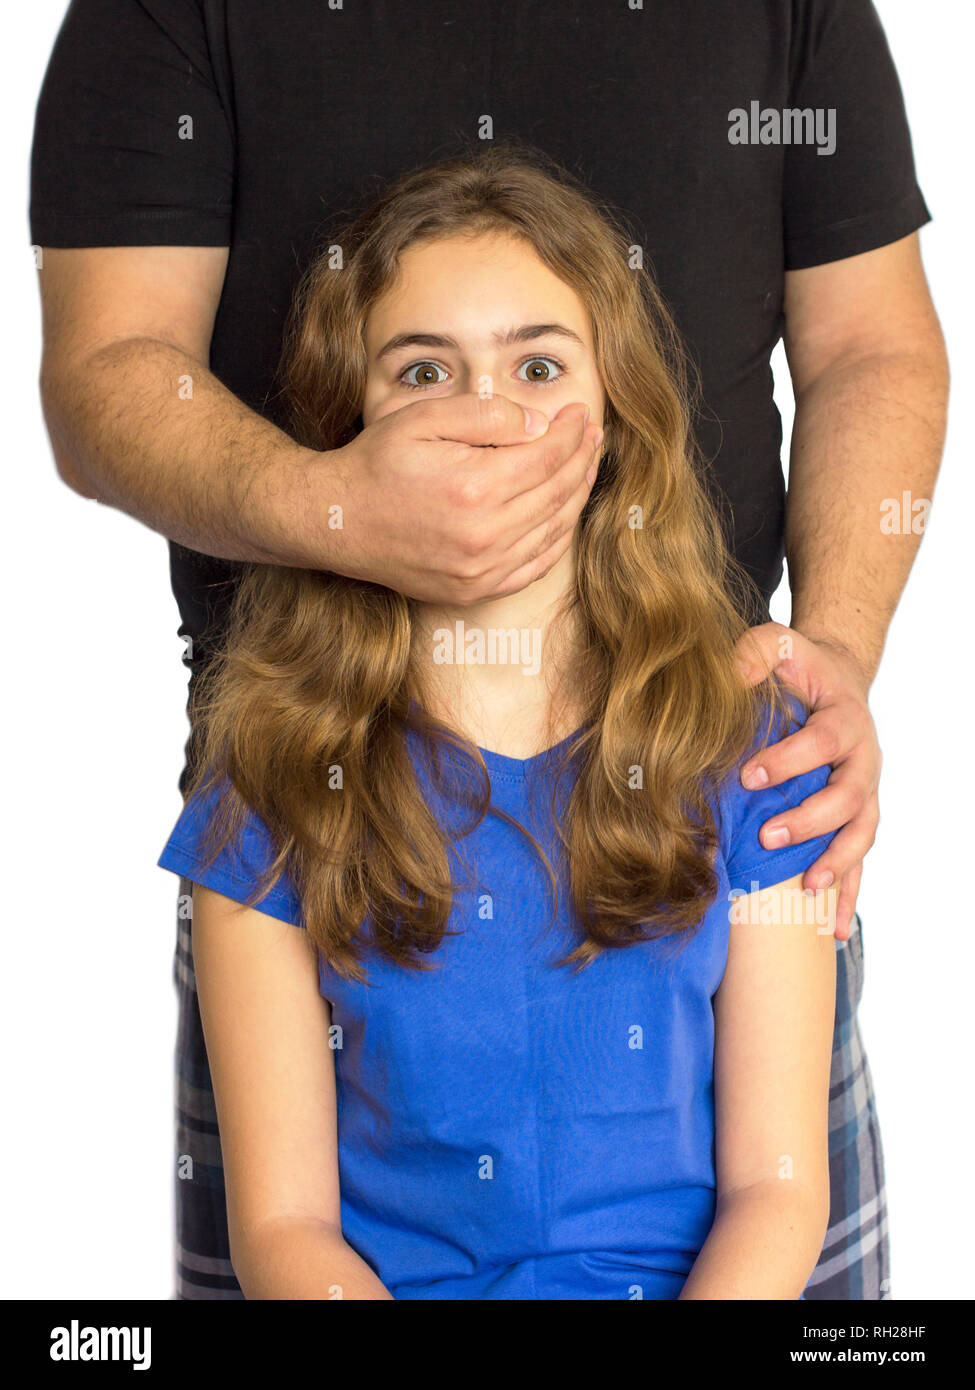 Child abuse, violence in family. Man shuts girl mouth with his hand Stock Photo